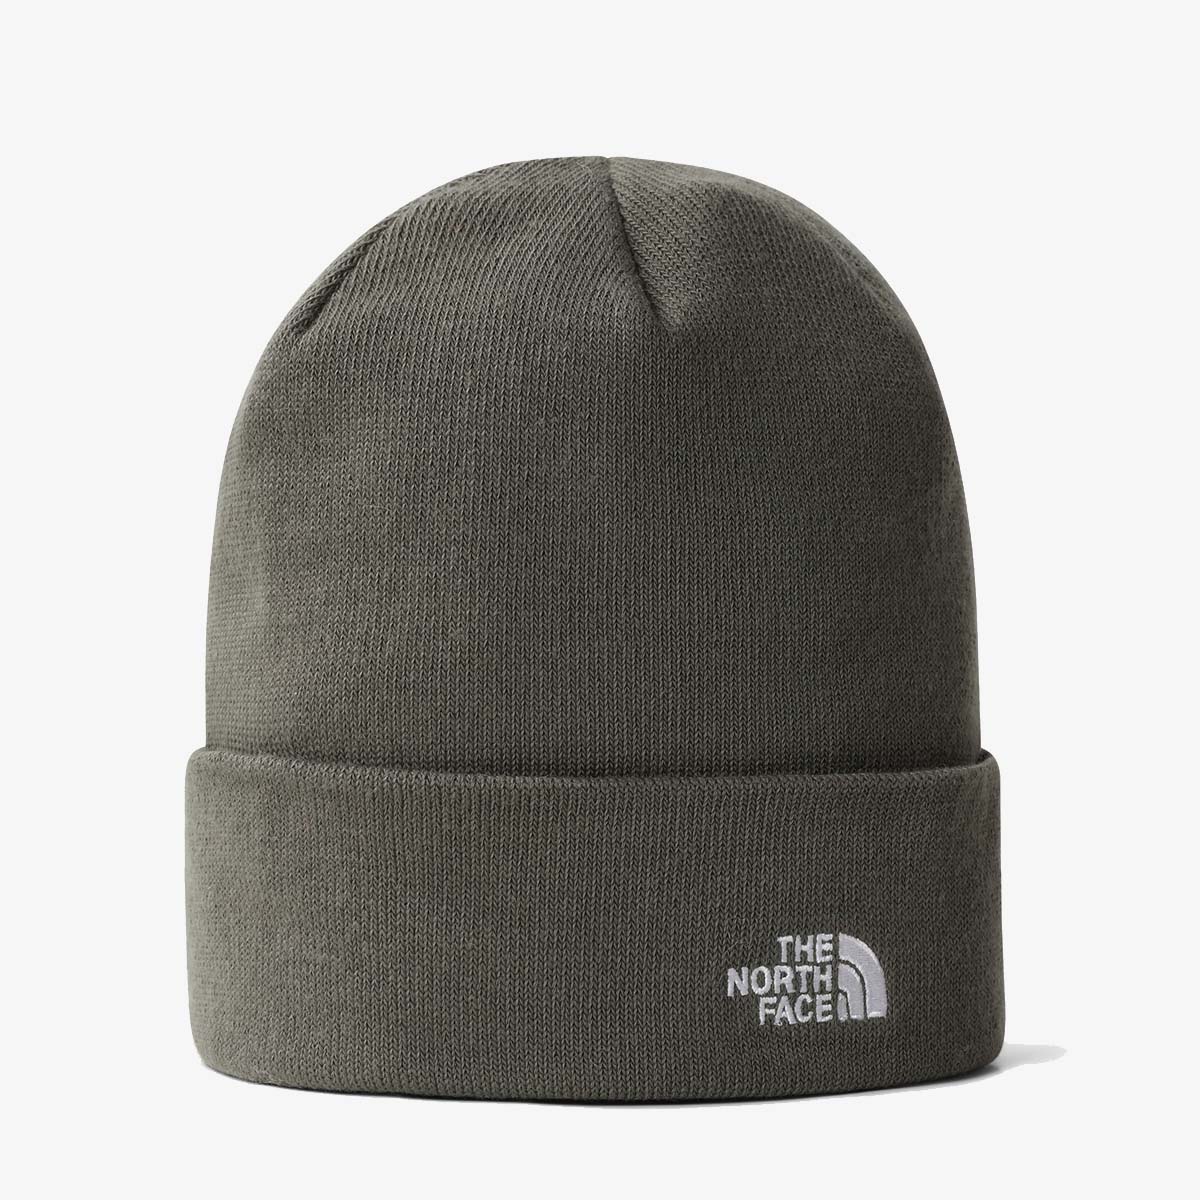 THE NORTH FACE KAPE NORM BEANIE THYME 